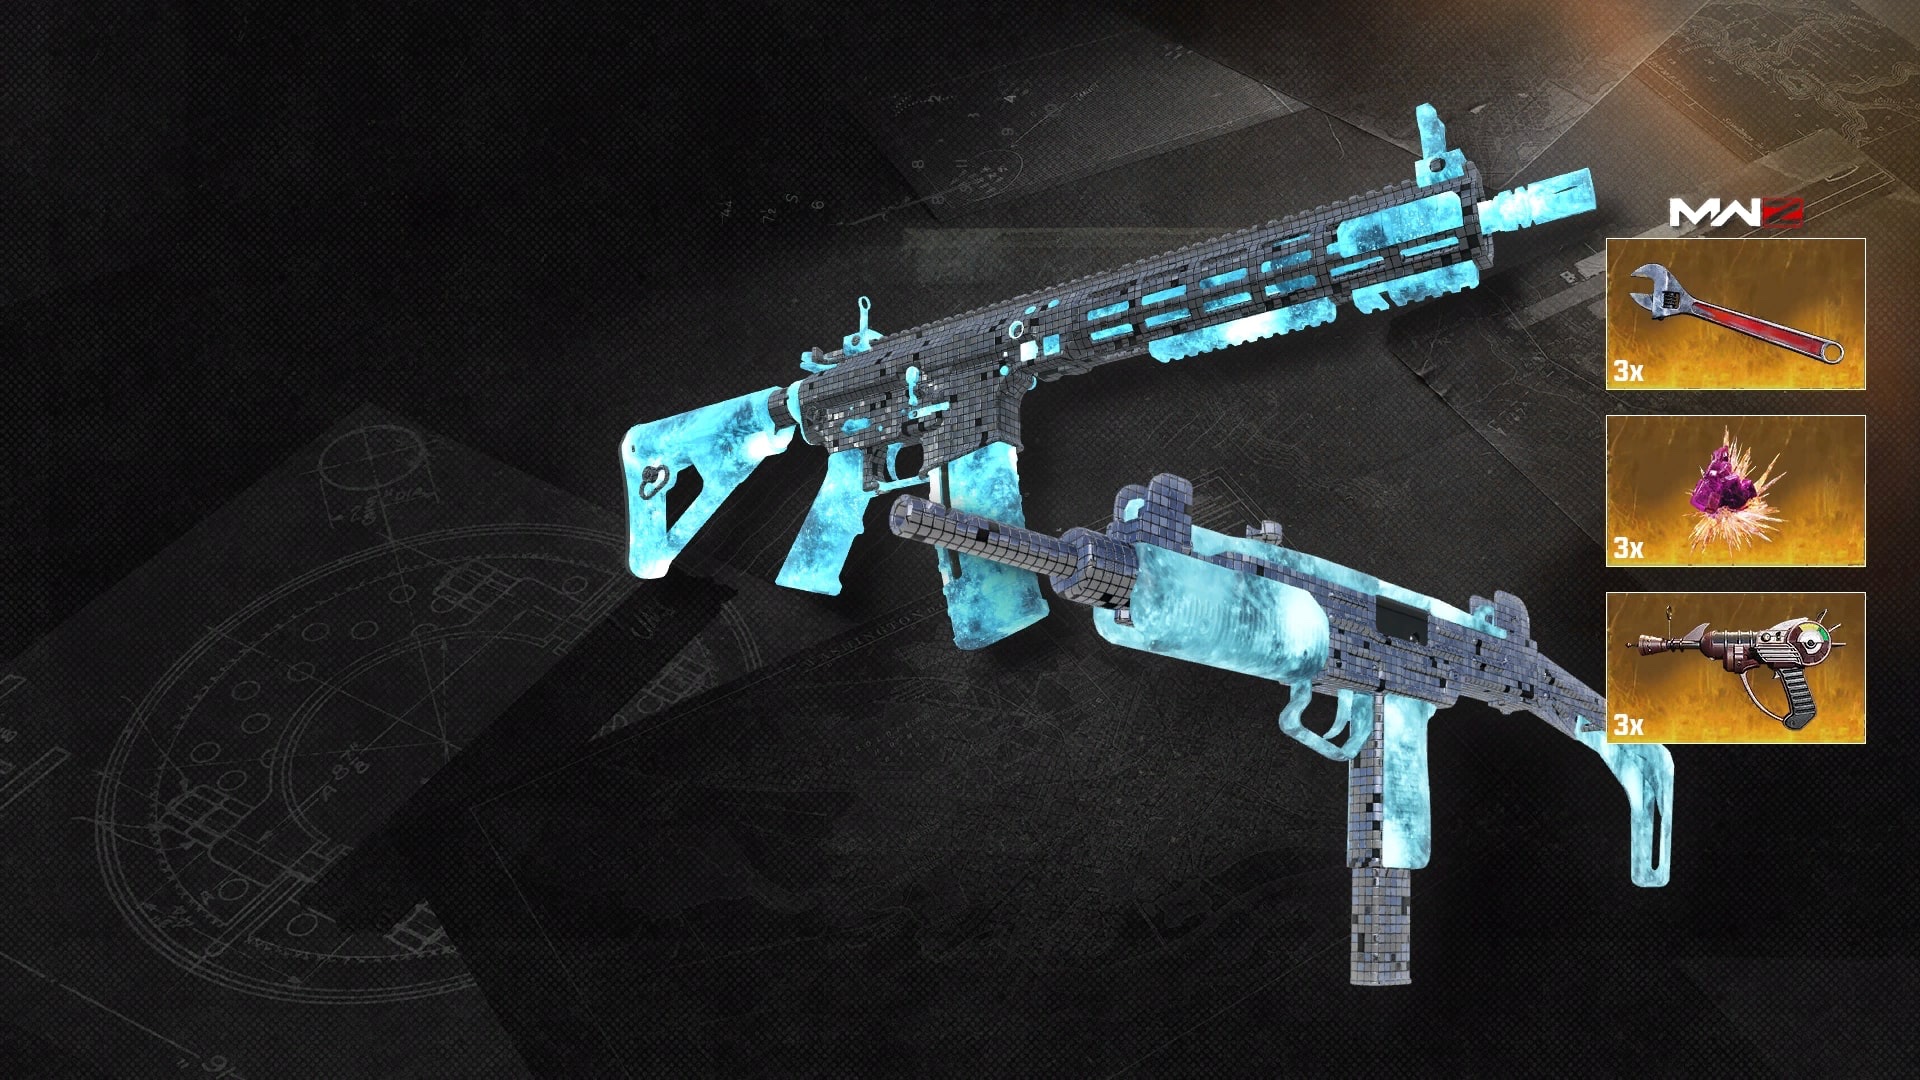 MW3 Reflect 115 Camo image from @crashfty on Twitter/X as part of a guide on how to unlock it in Modern Warfare 3 (MW3) and Warzone.